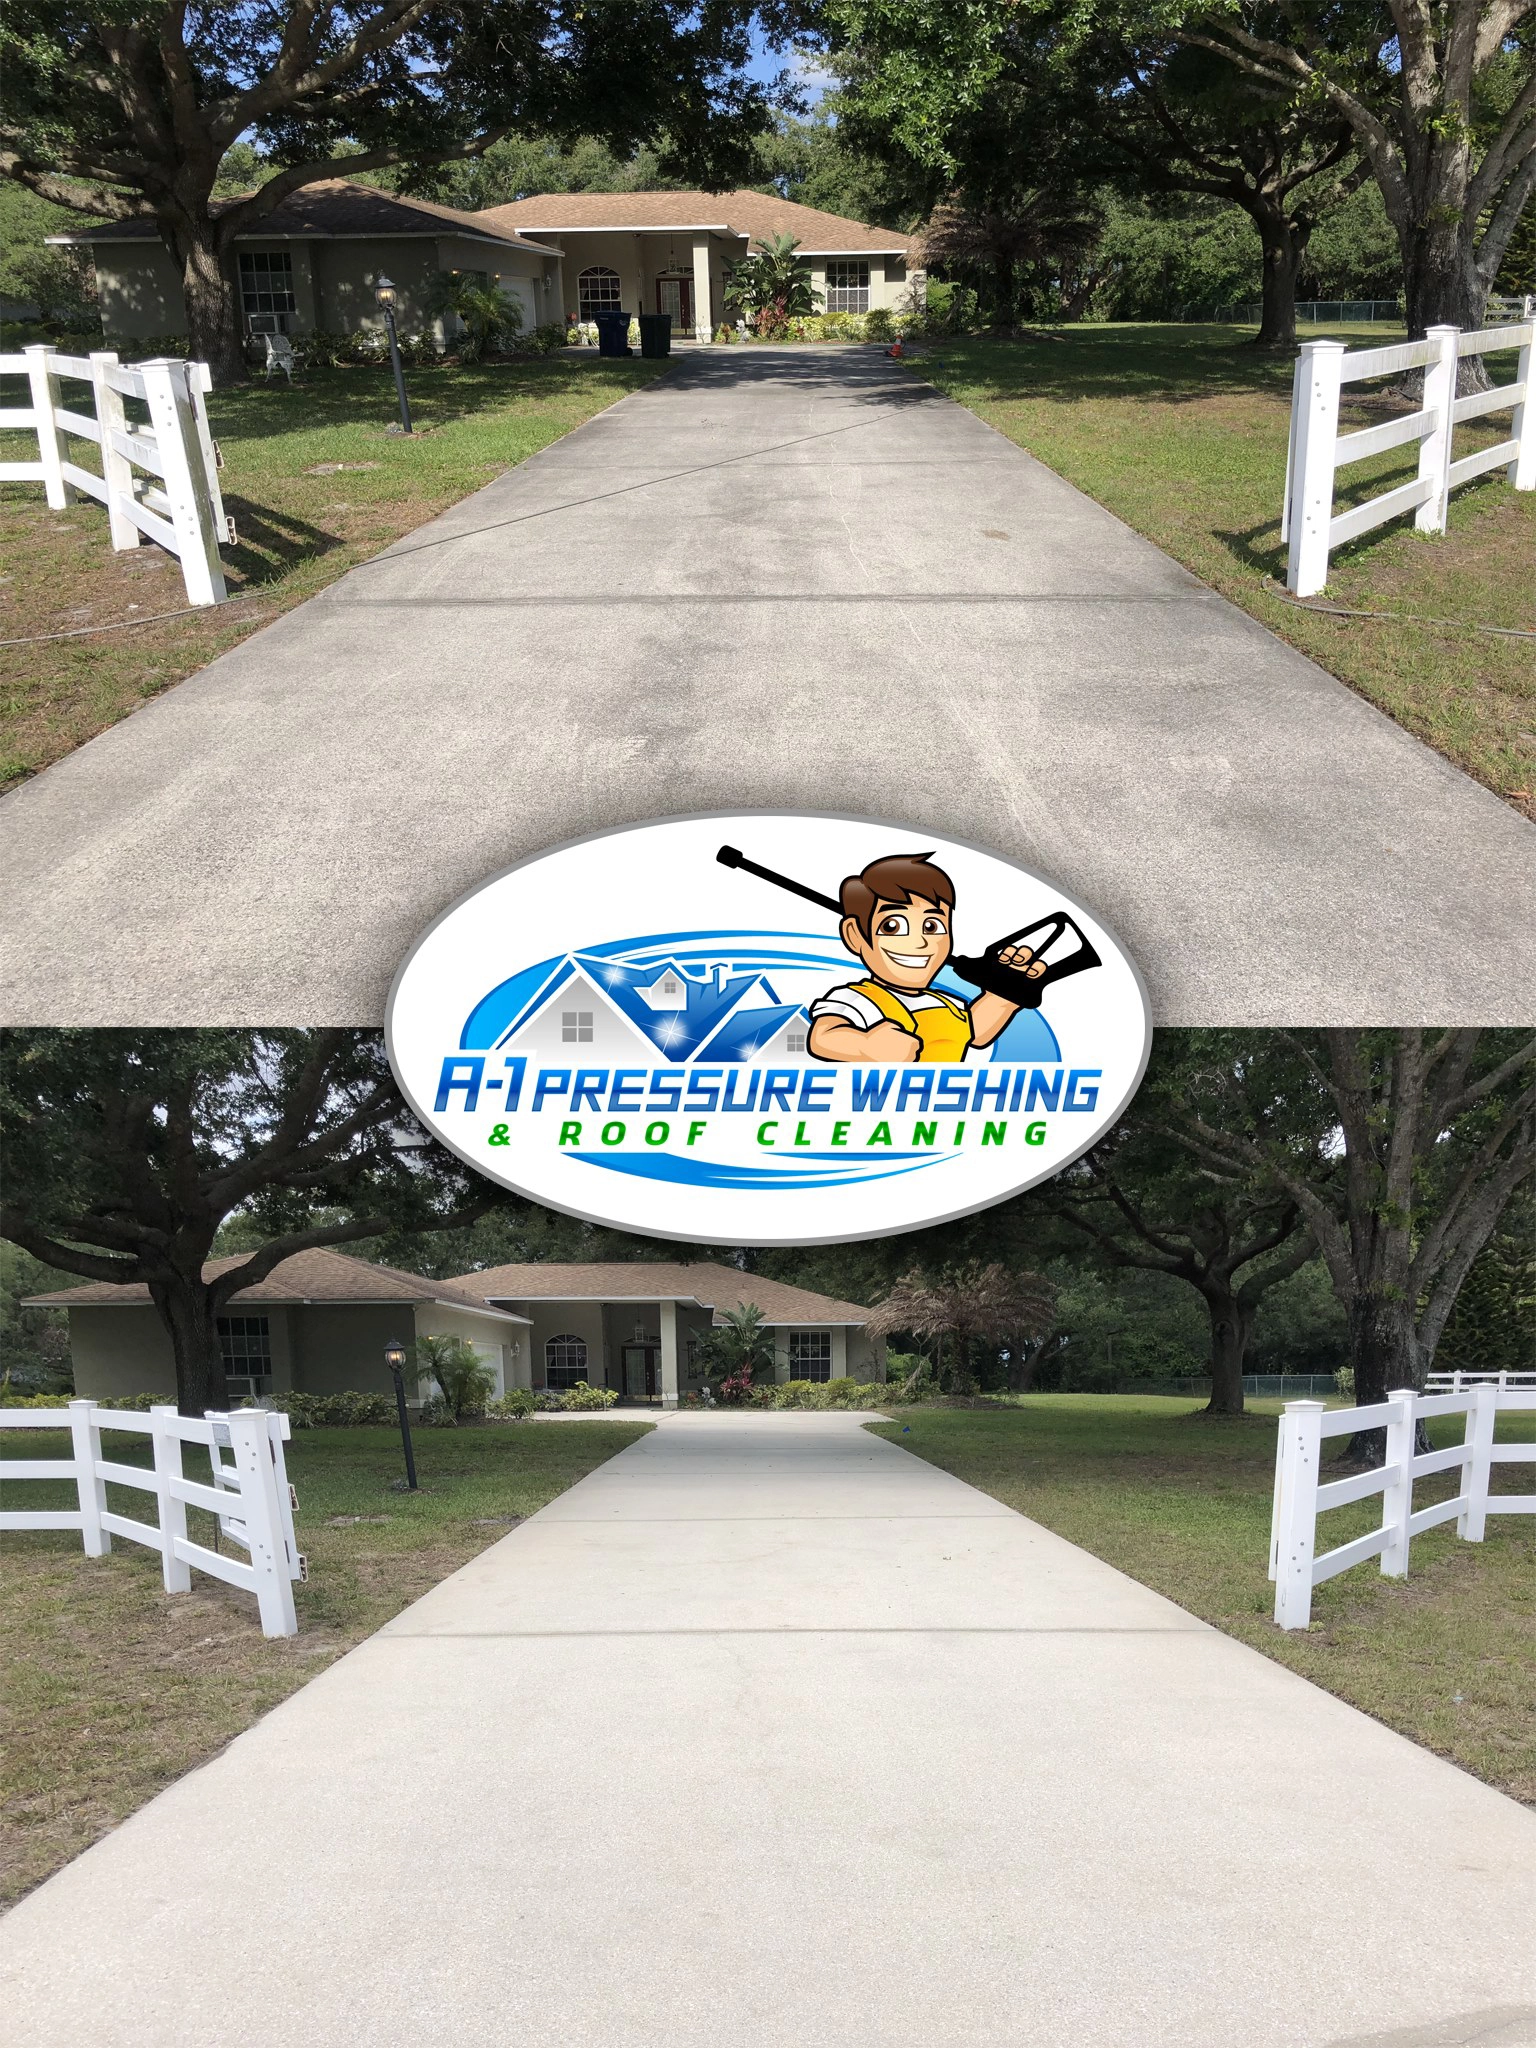 Driveway Cleaning Services | A-1 Pressure Washing & Roof Cleaning | 941-815-8454 